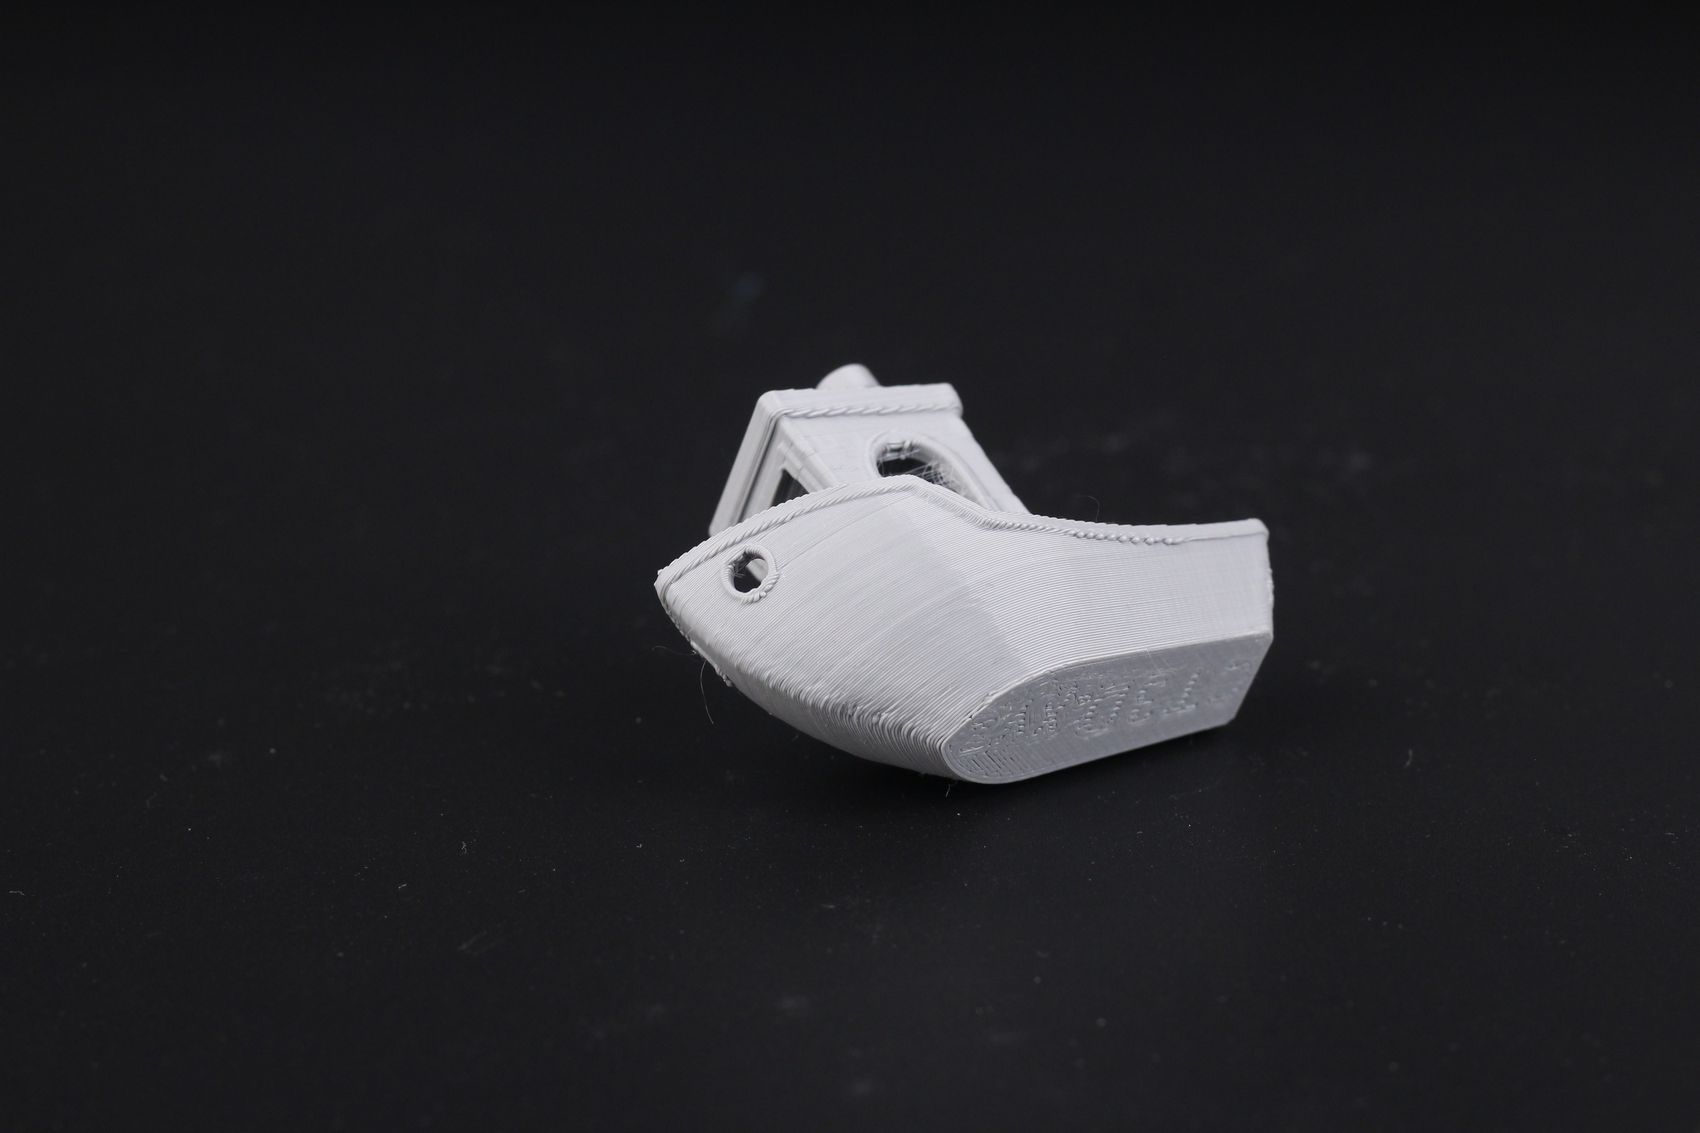 3D Benchy printed on the Anycubic Kobra Plus1 | Anycubic Kobra Plus Review: A Larger Vyper